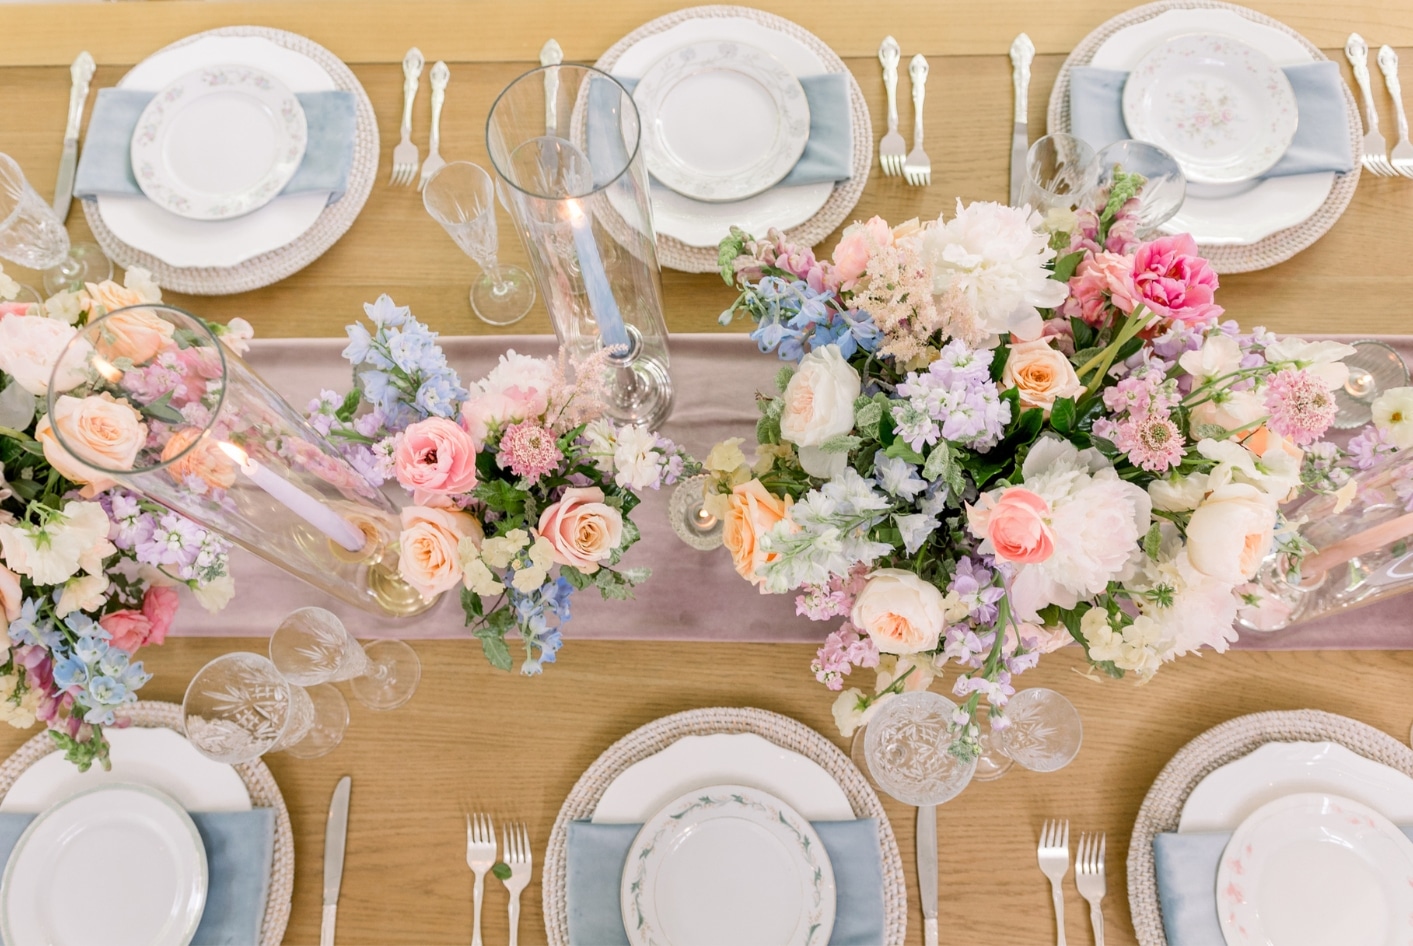 Elevate Your Wedding Style with Expert Design at CJ’s Off the Square